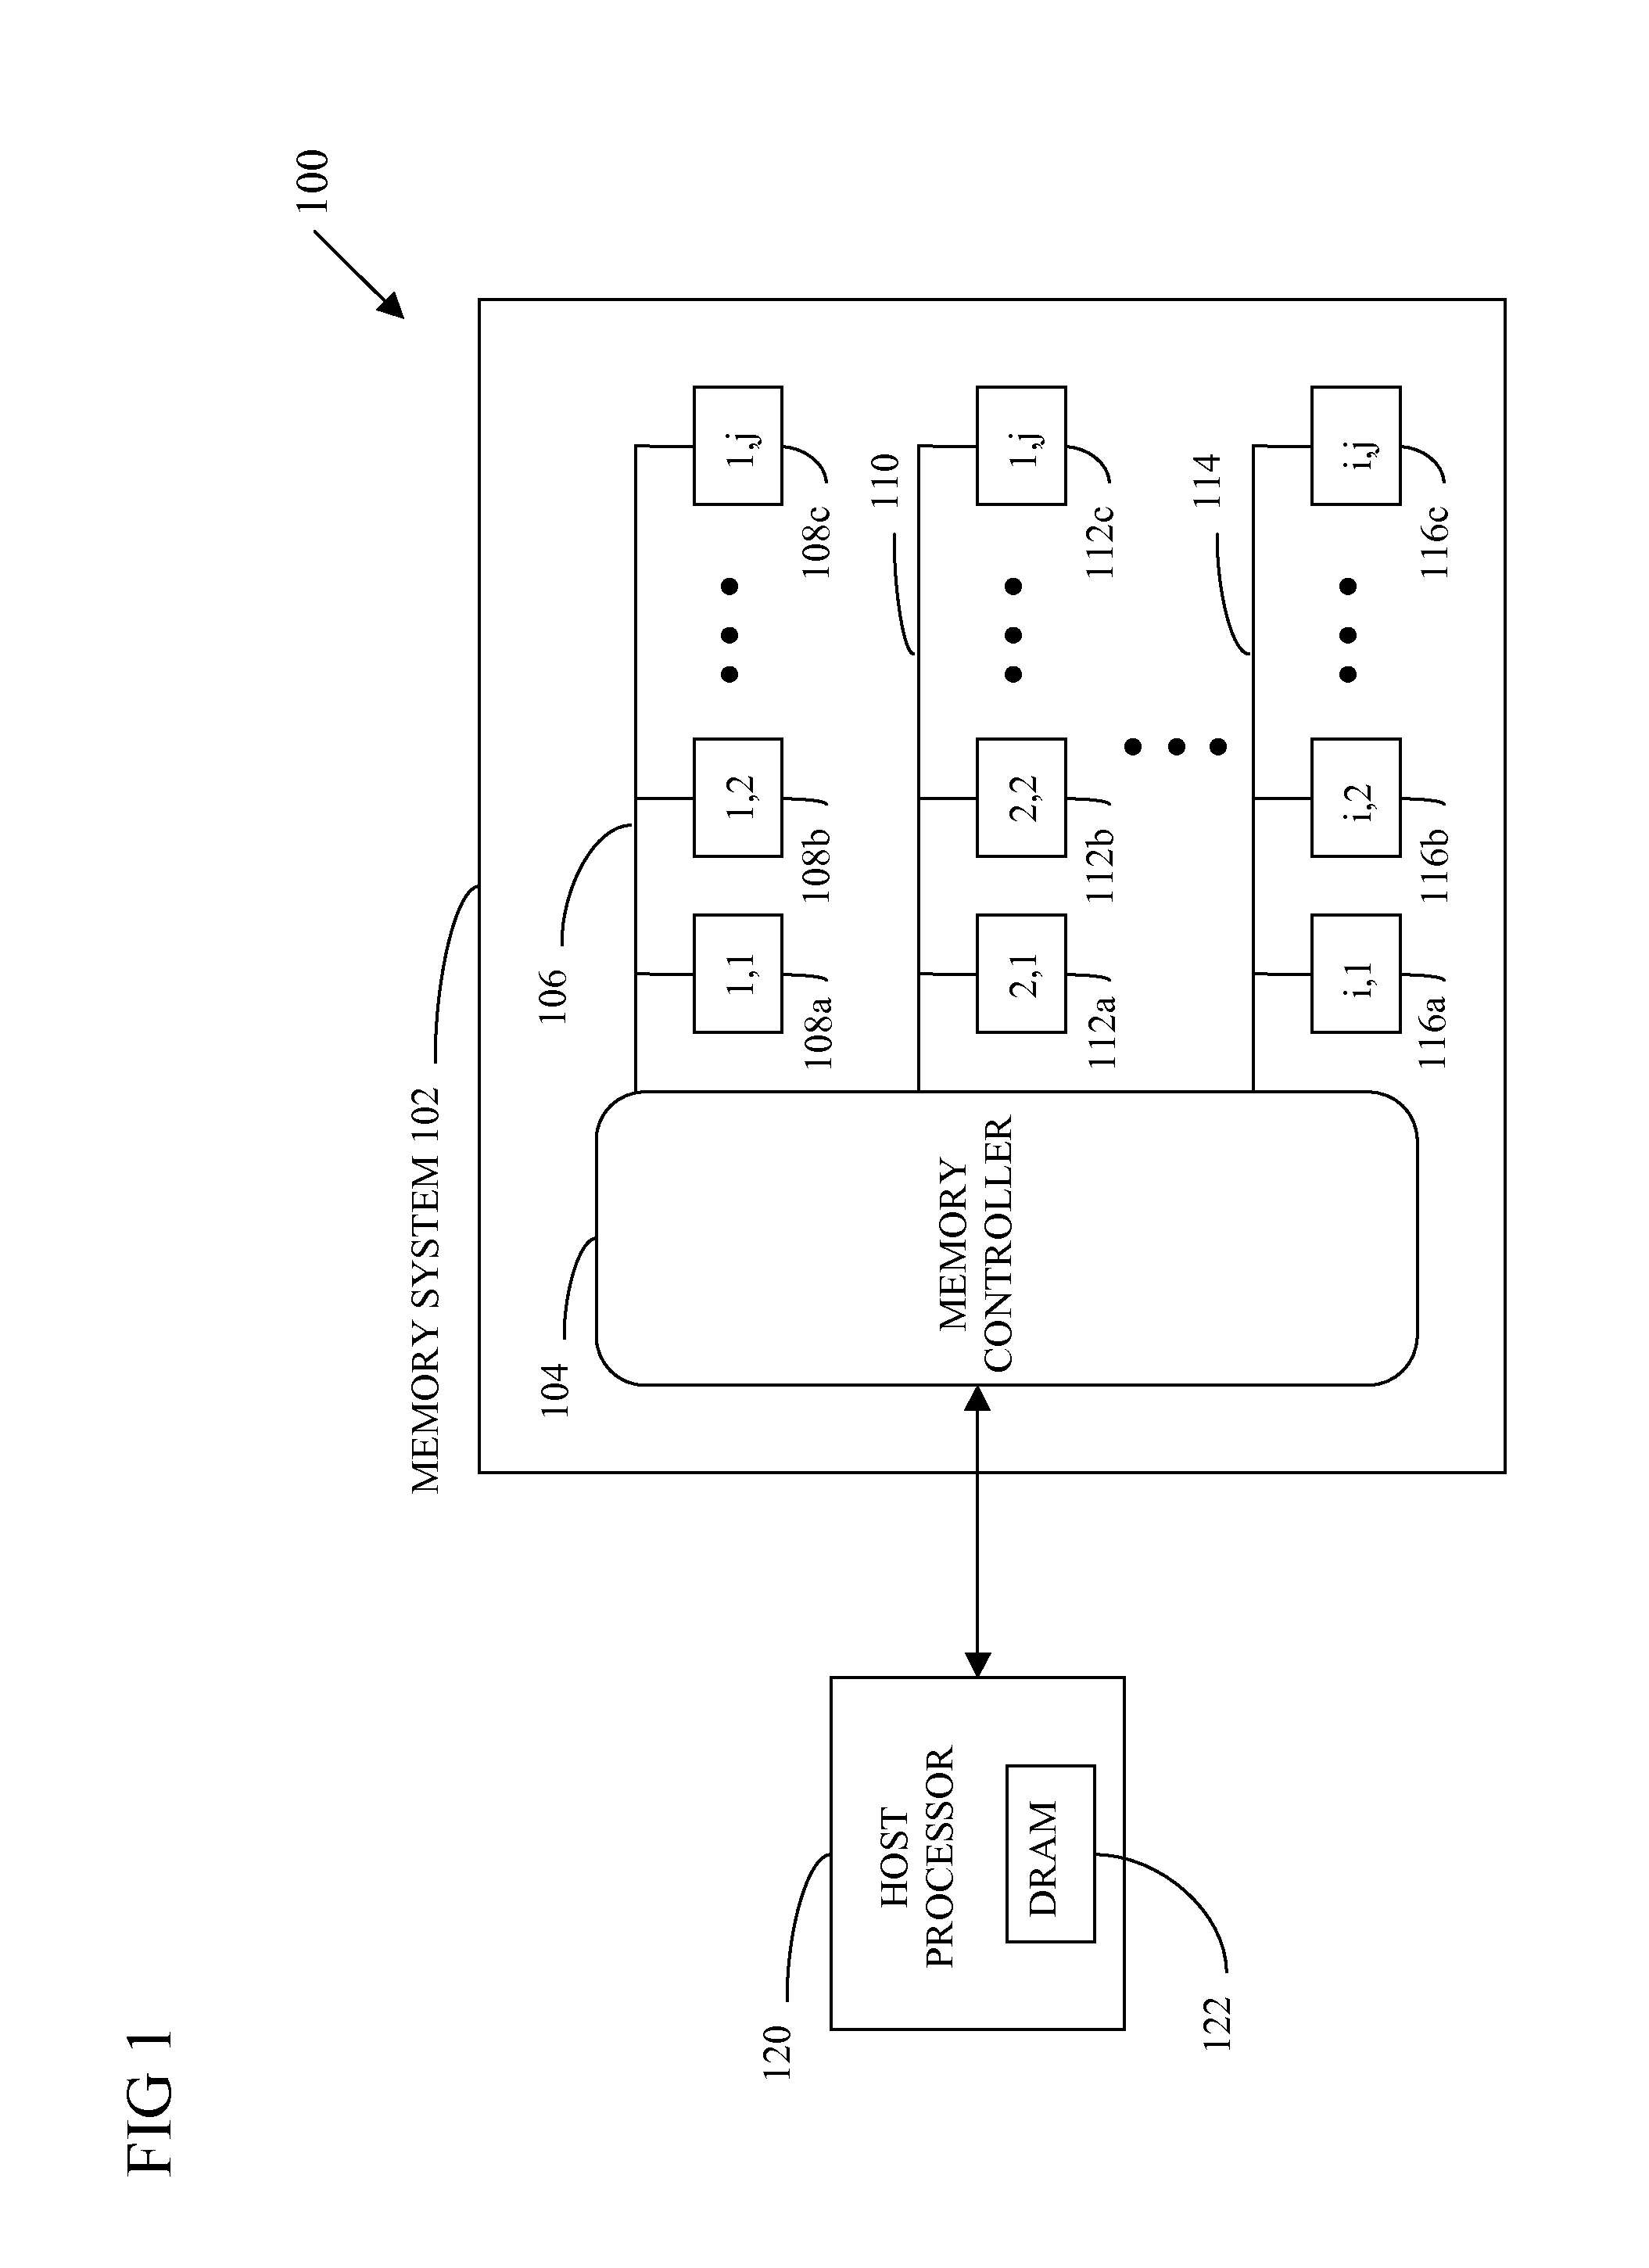 Apparatus and method based on LDPC codes for adjusting a correctable raw bit error rate limit in a memory system